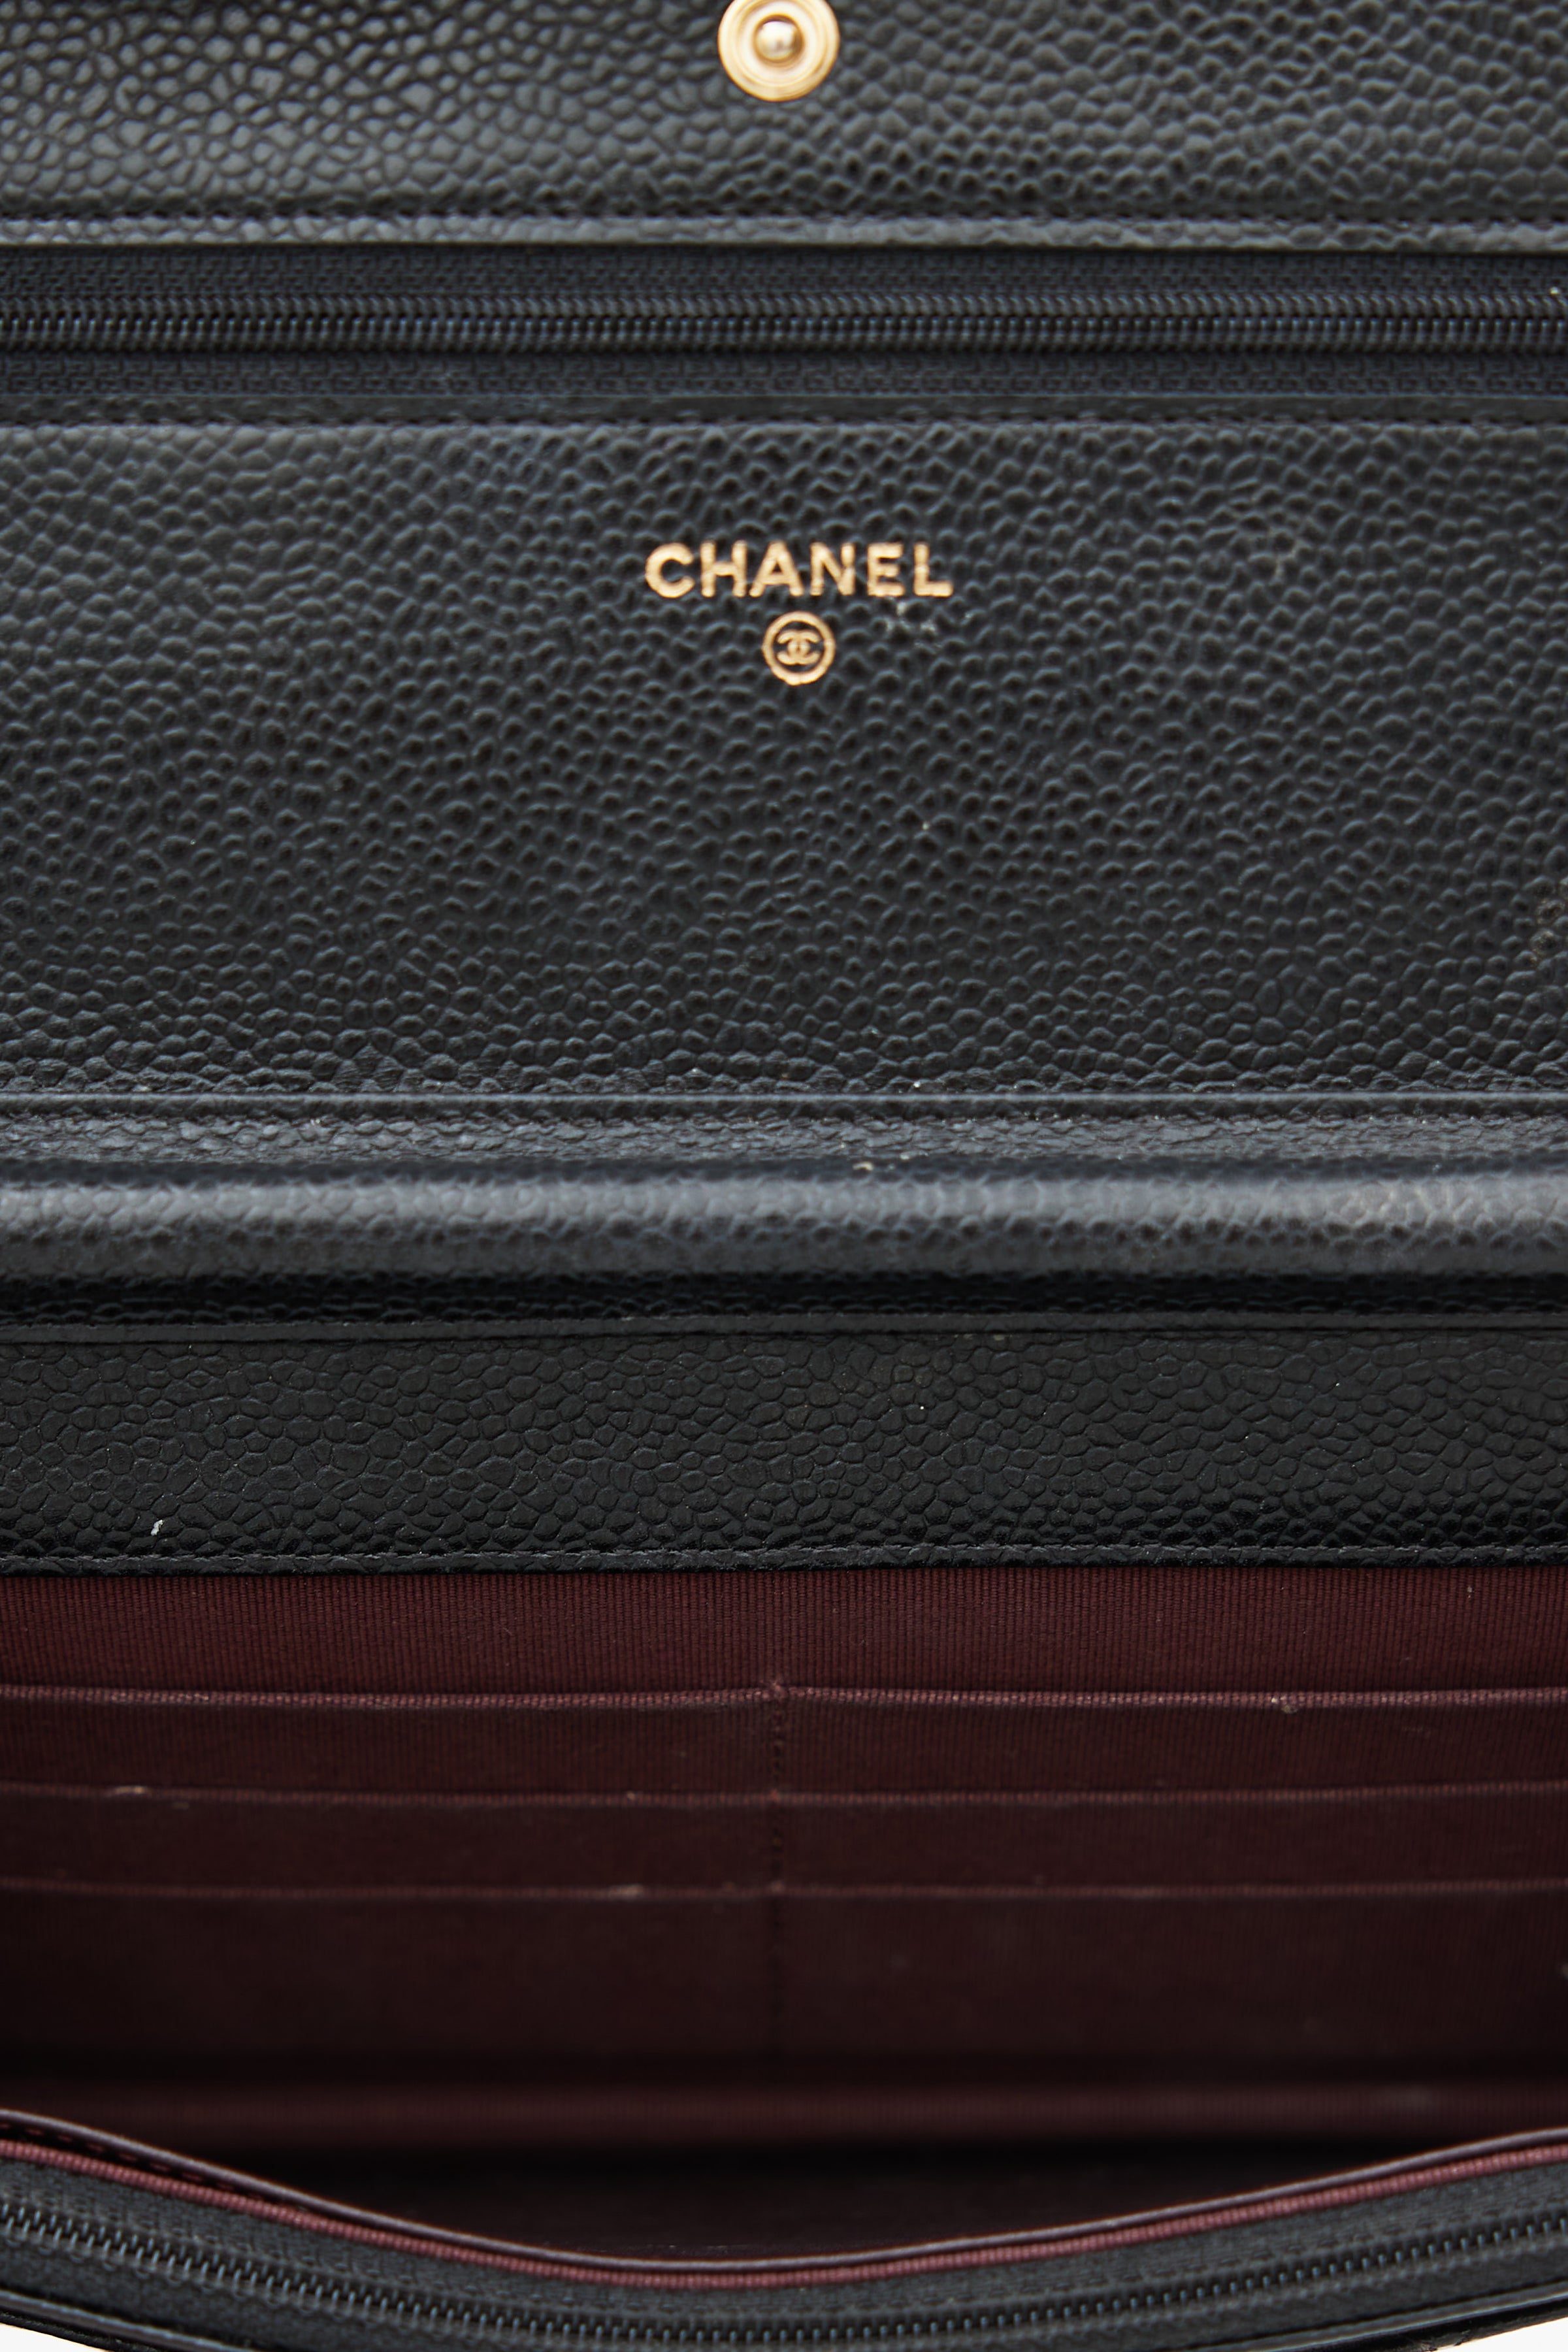 chanel quilted wallet